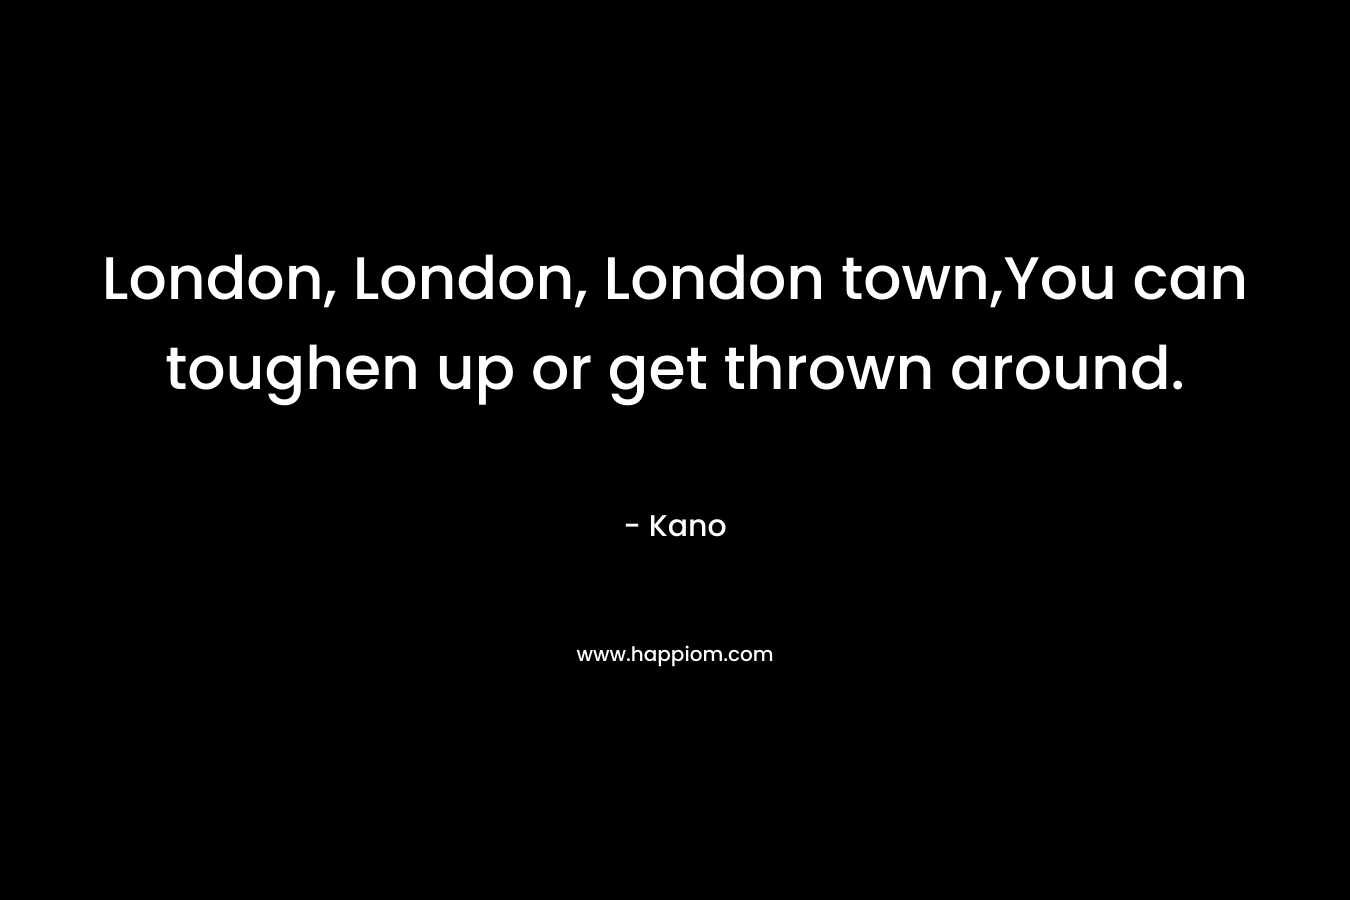 London, London, London town,You can toughen up or get thrown around.